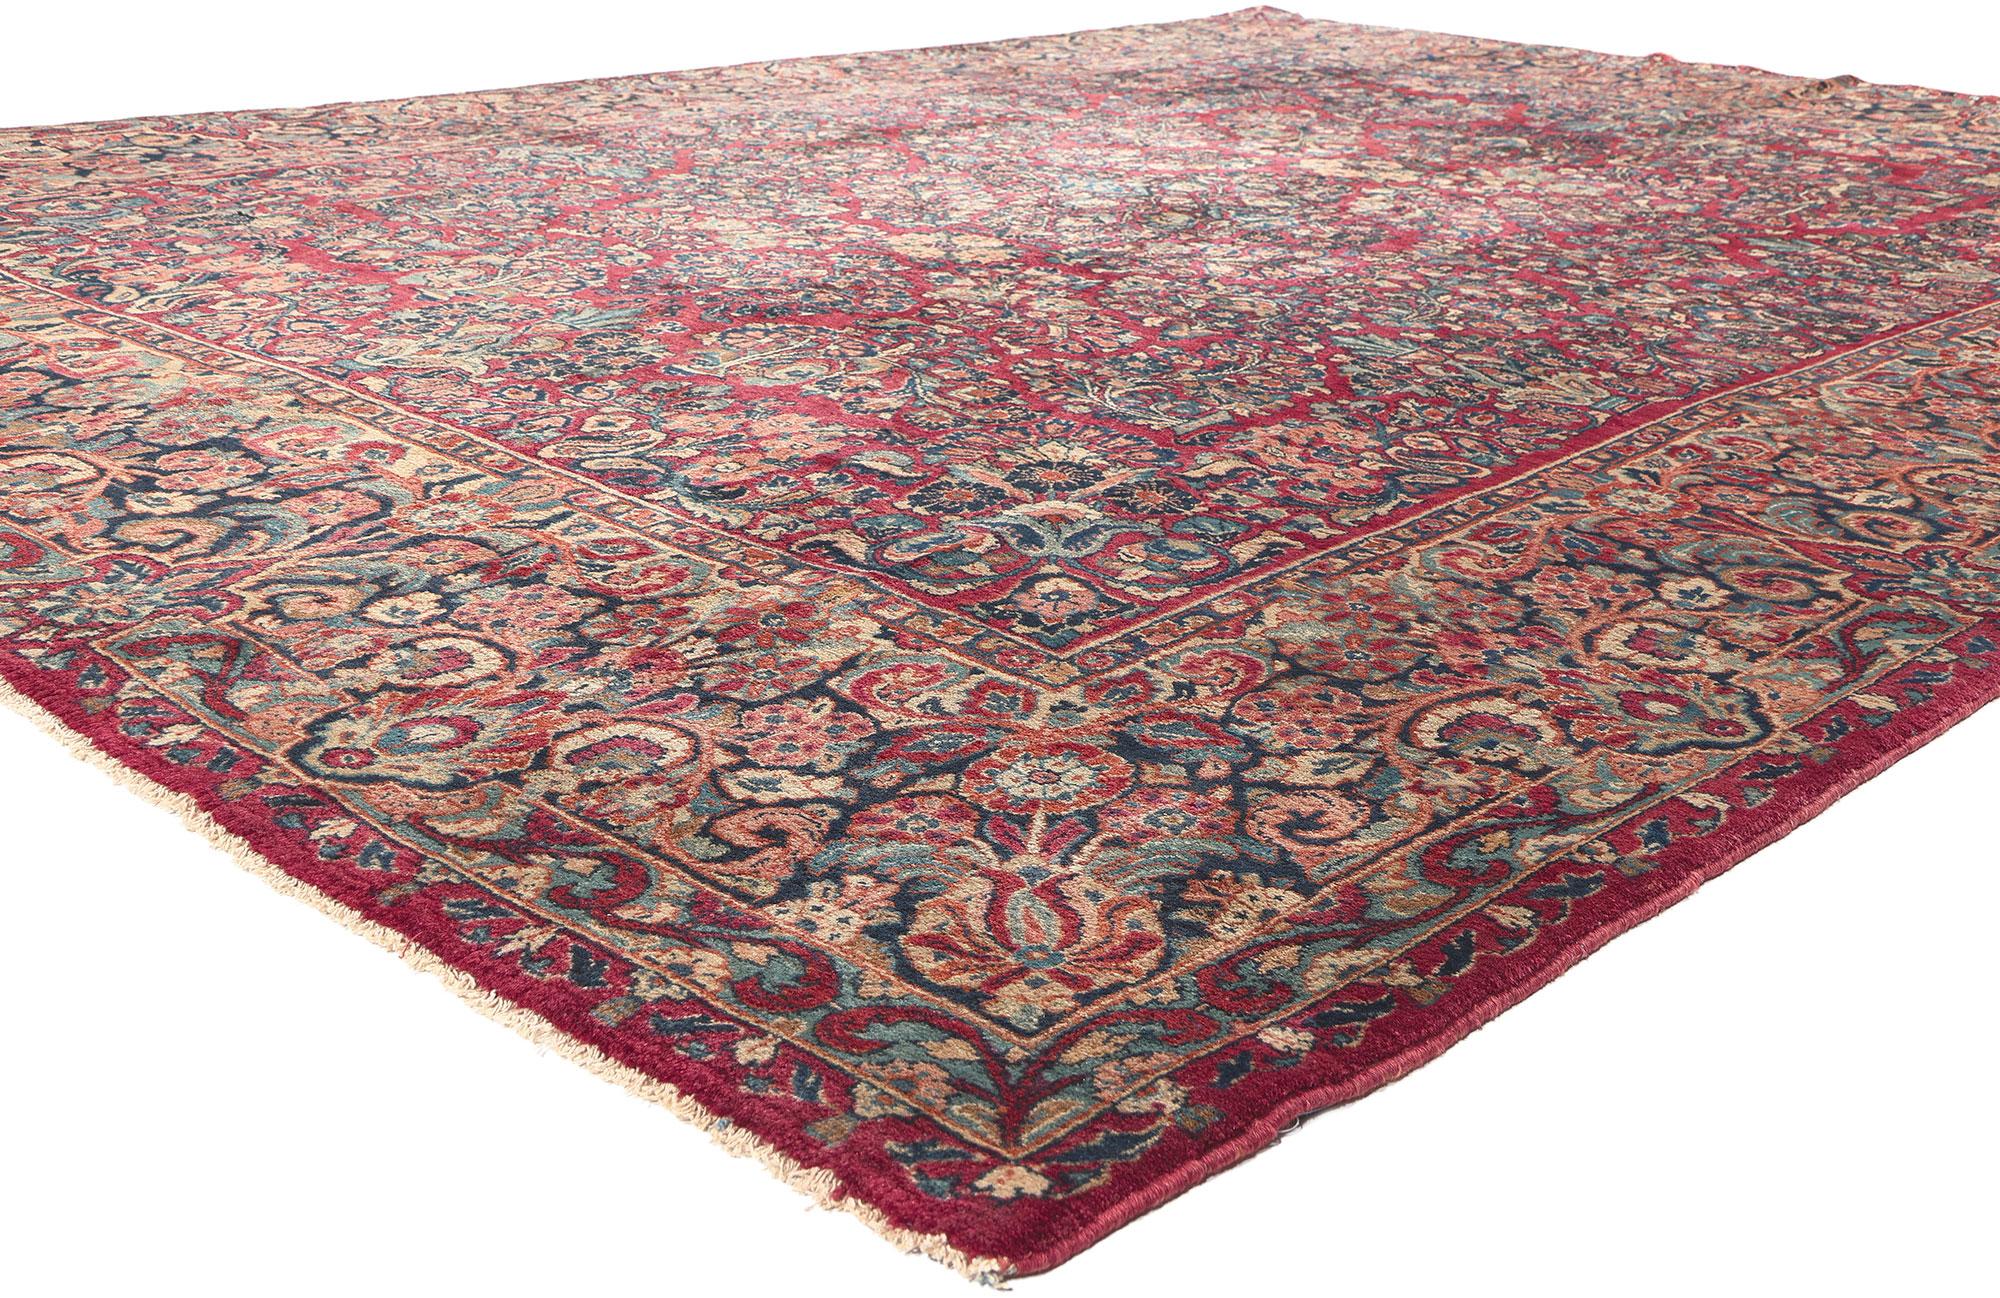 73369 Antique Persian Sarouk Rug, 08'10 X 11'10. Immerse yourself in the allure of an era gone by with this hand knotted wool antique Persian Sarouk rug, showcasing an Art Nouveau influence that adds a unique touch to its timeless appeal. This